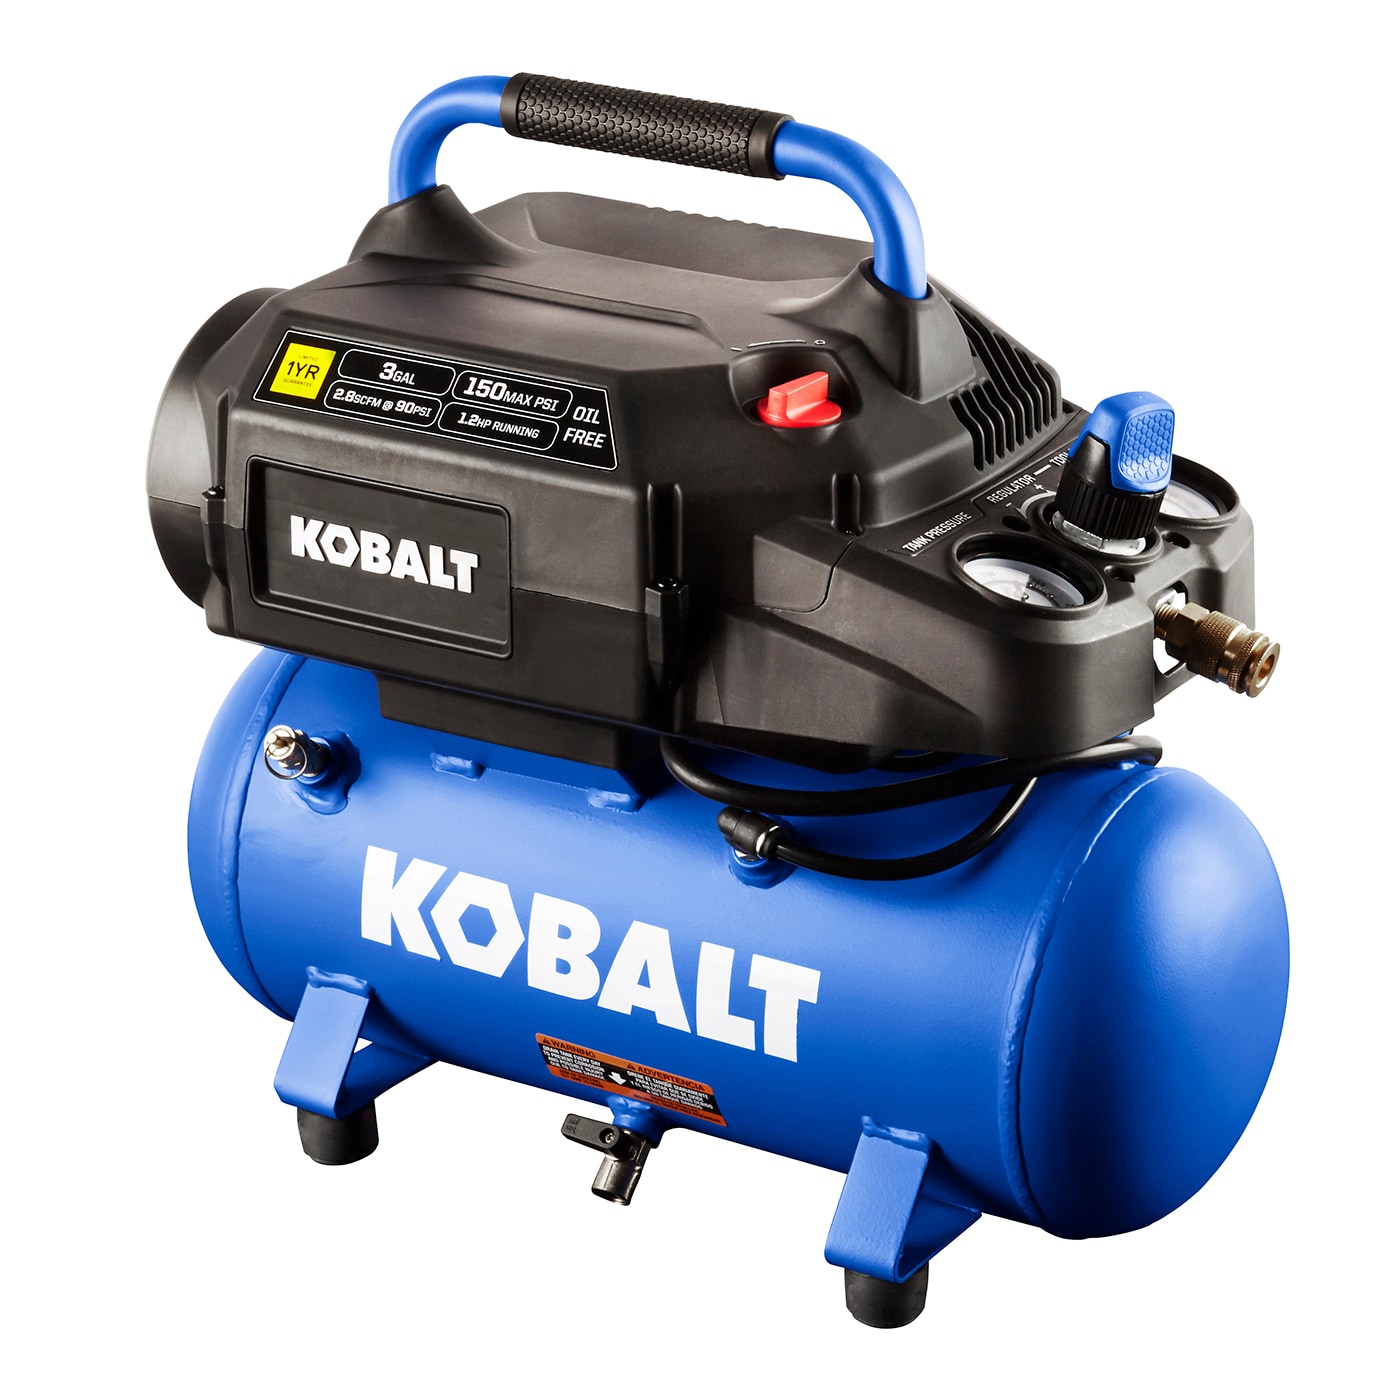 Kobalt 3-Gallons Single Stage Portable Corded Electric Hot Dog Air Compressor